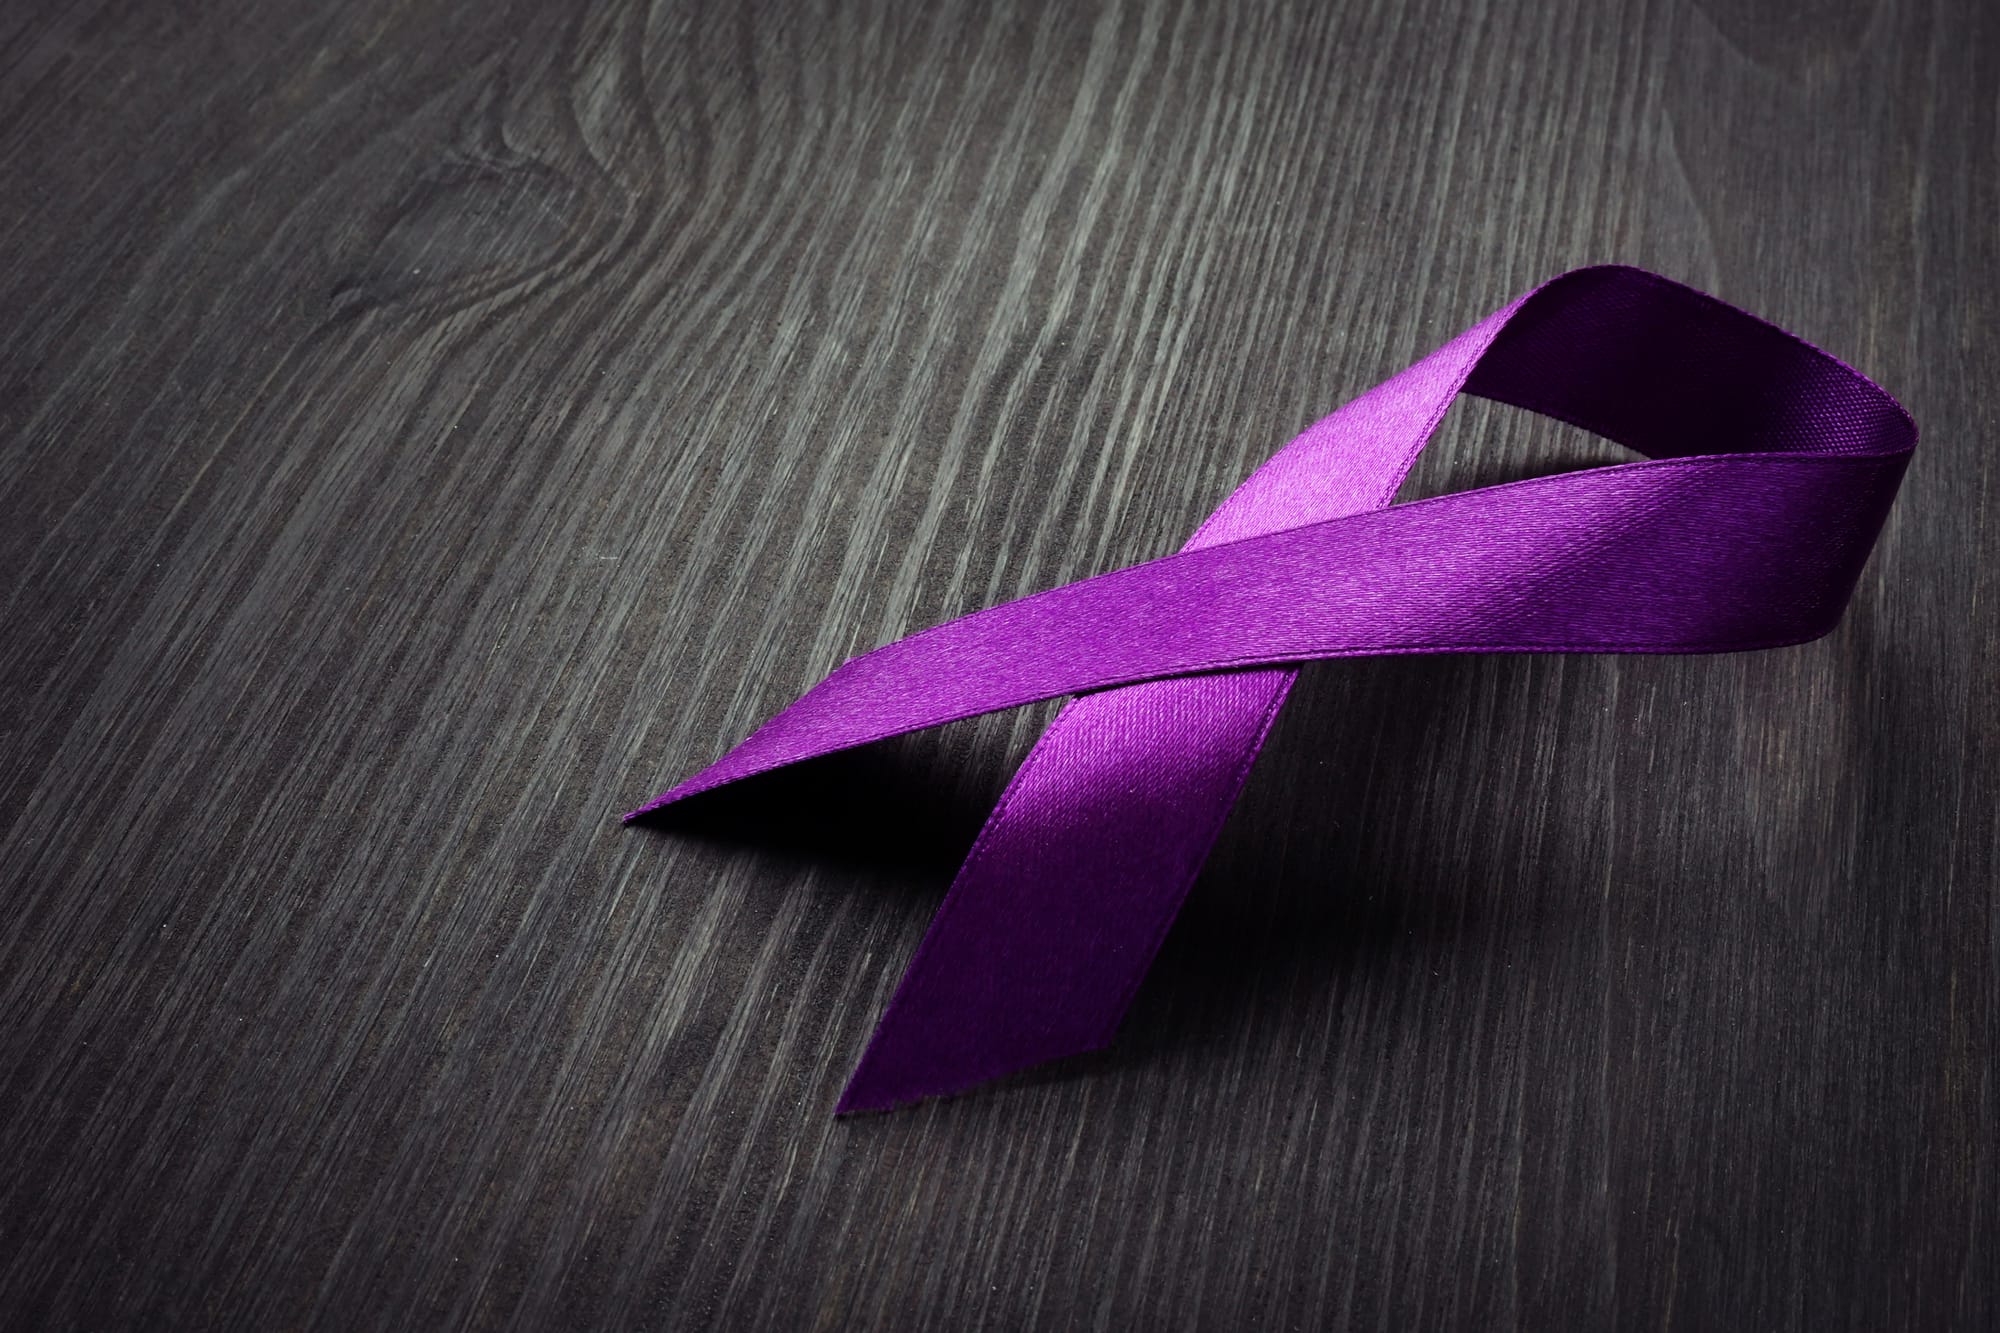 Pancreatic cancer risk, symptoms and treatment